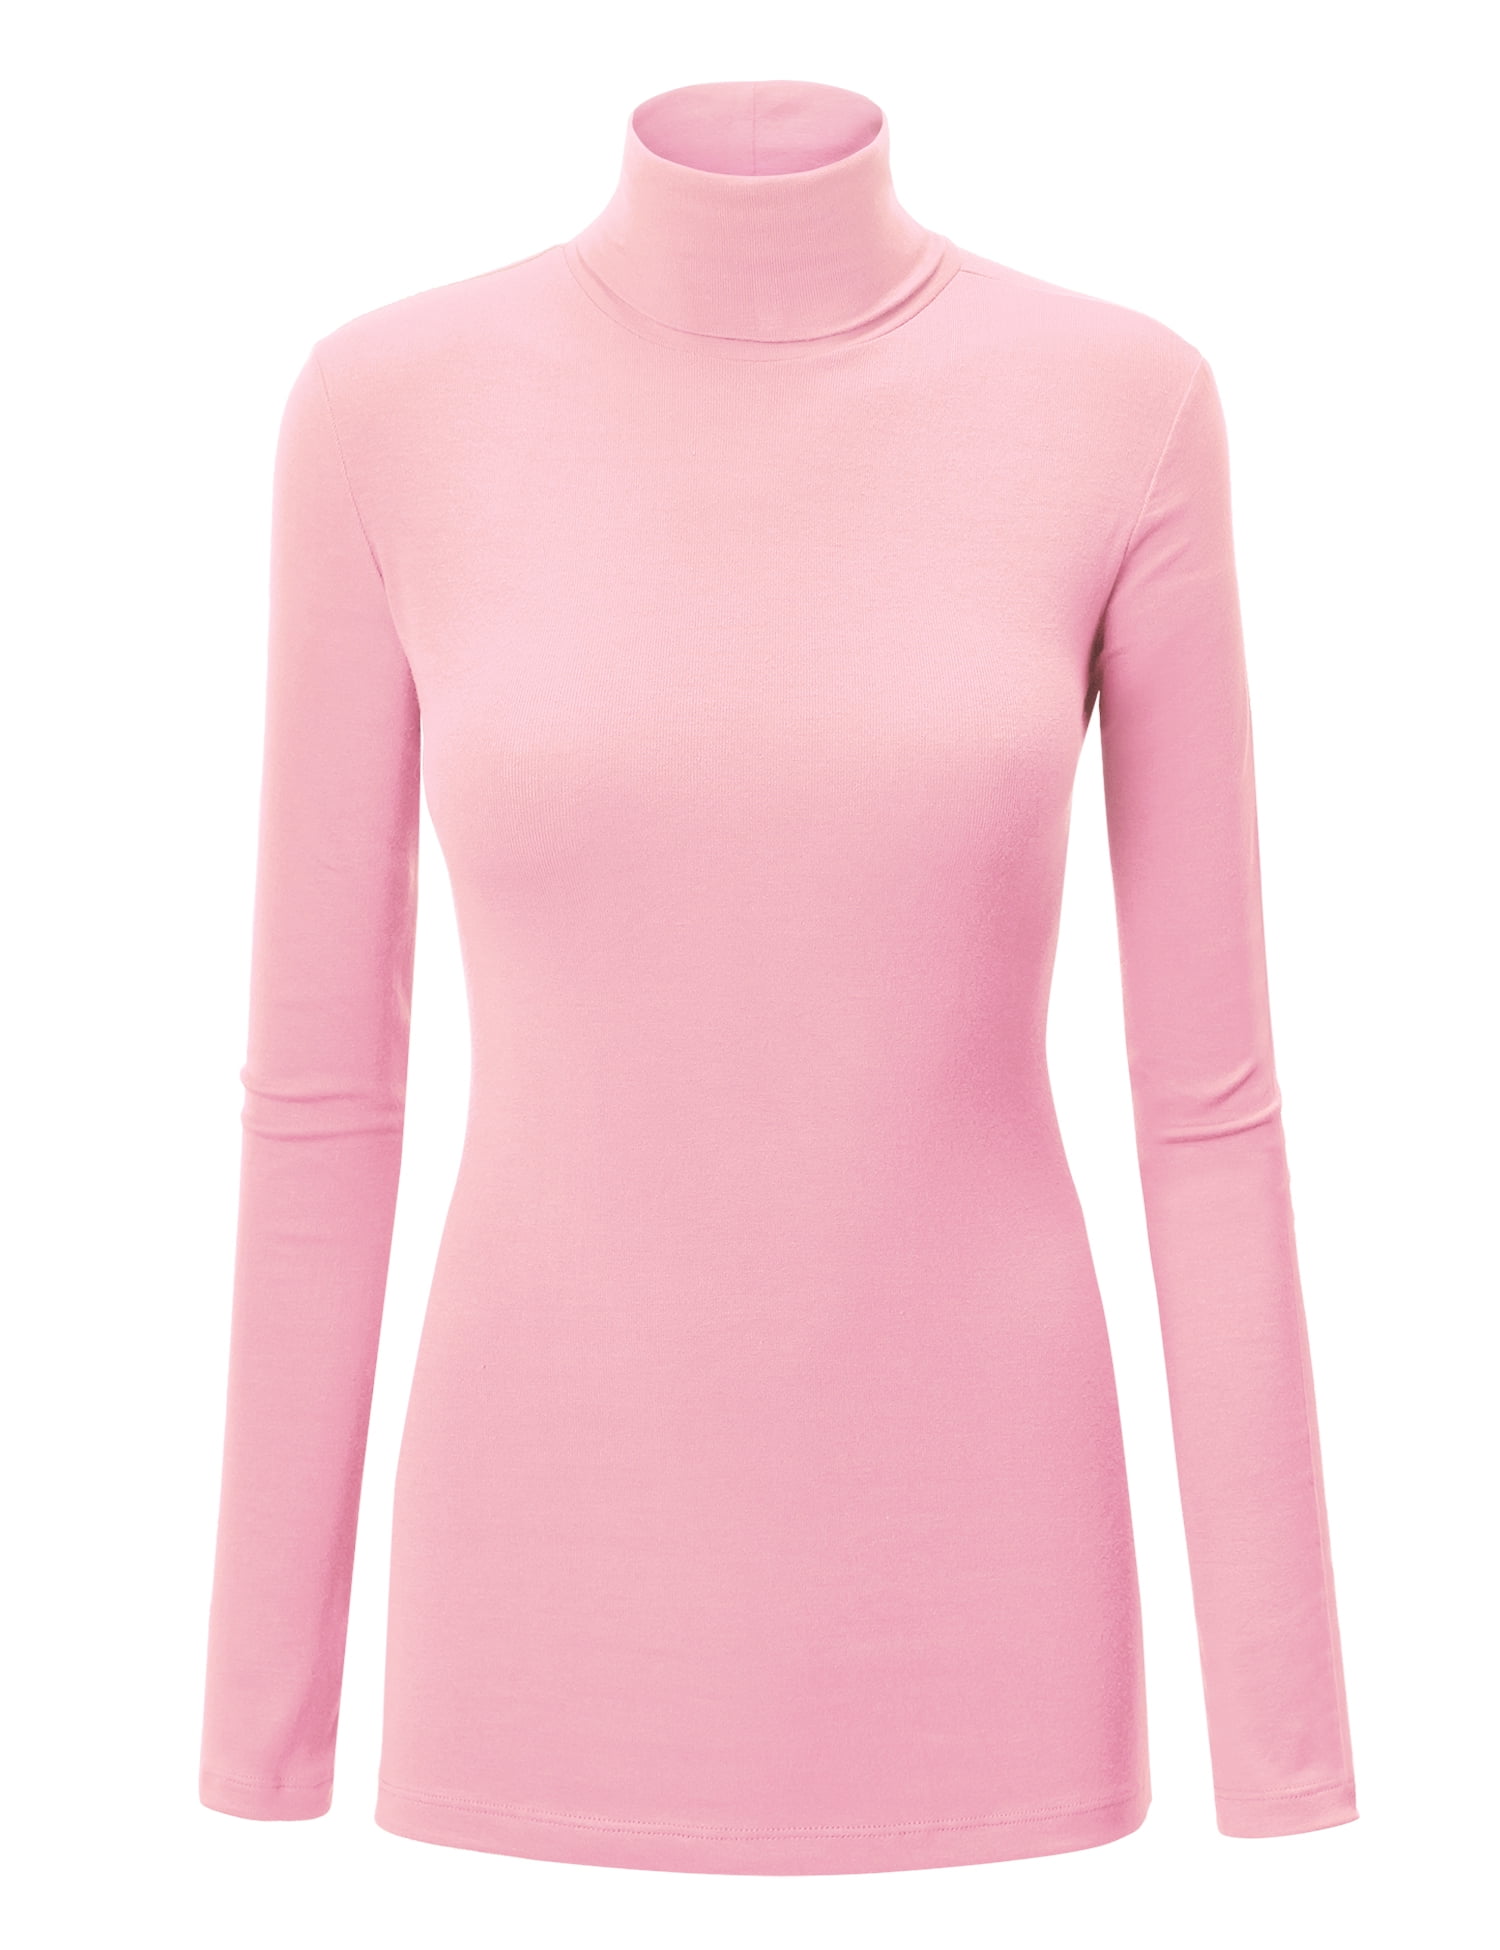 Made By Johnny Wt950 Womens Long Sleeve Rib Turtleneck Top Pullover Sweater Xxxl Pink